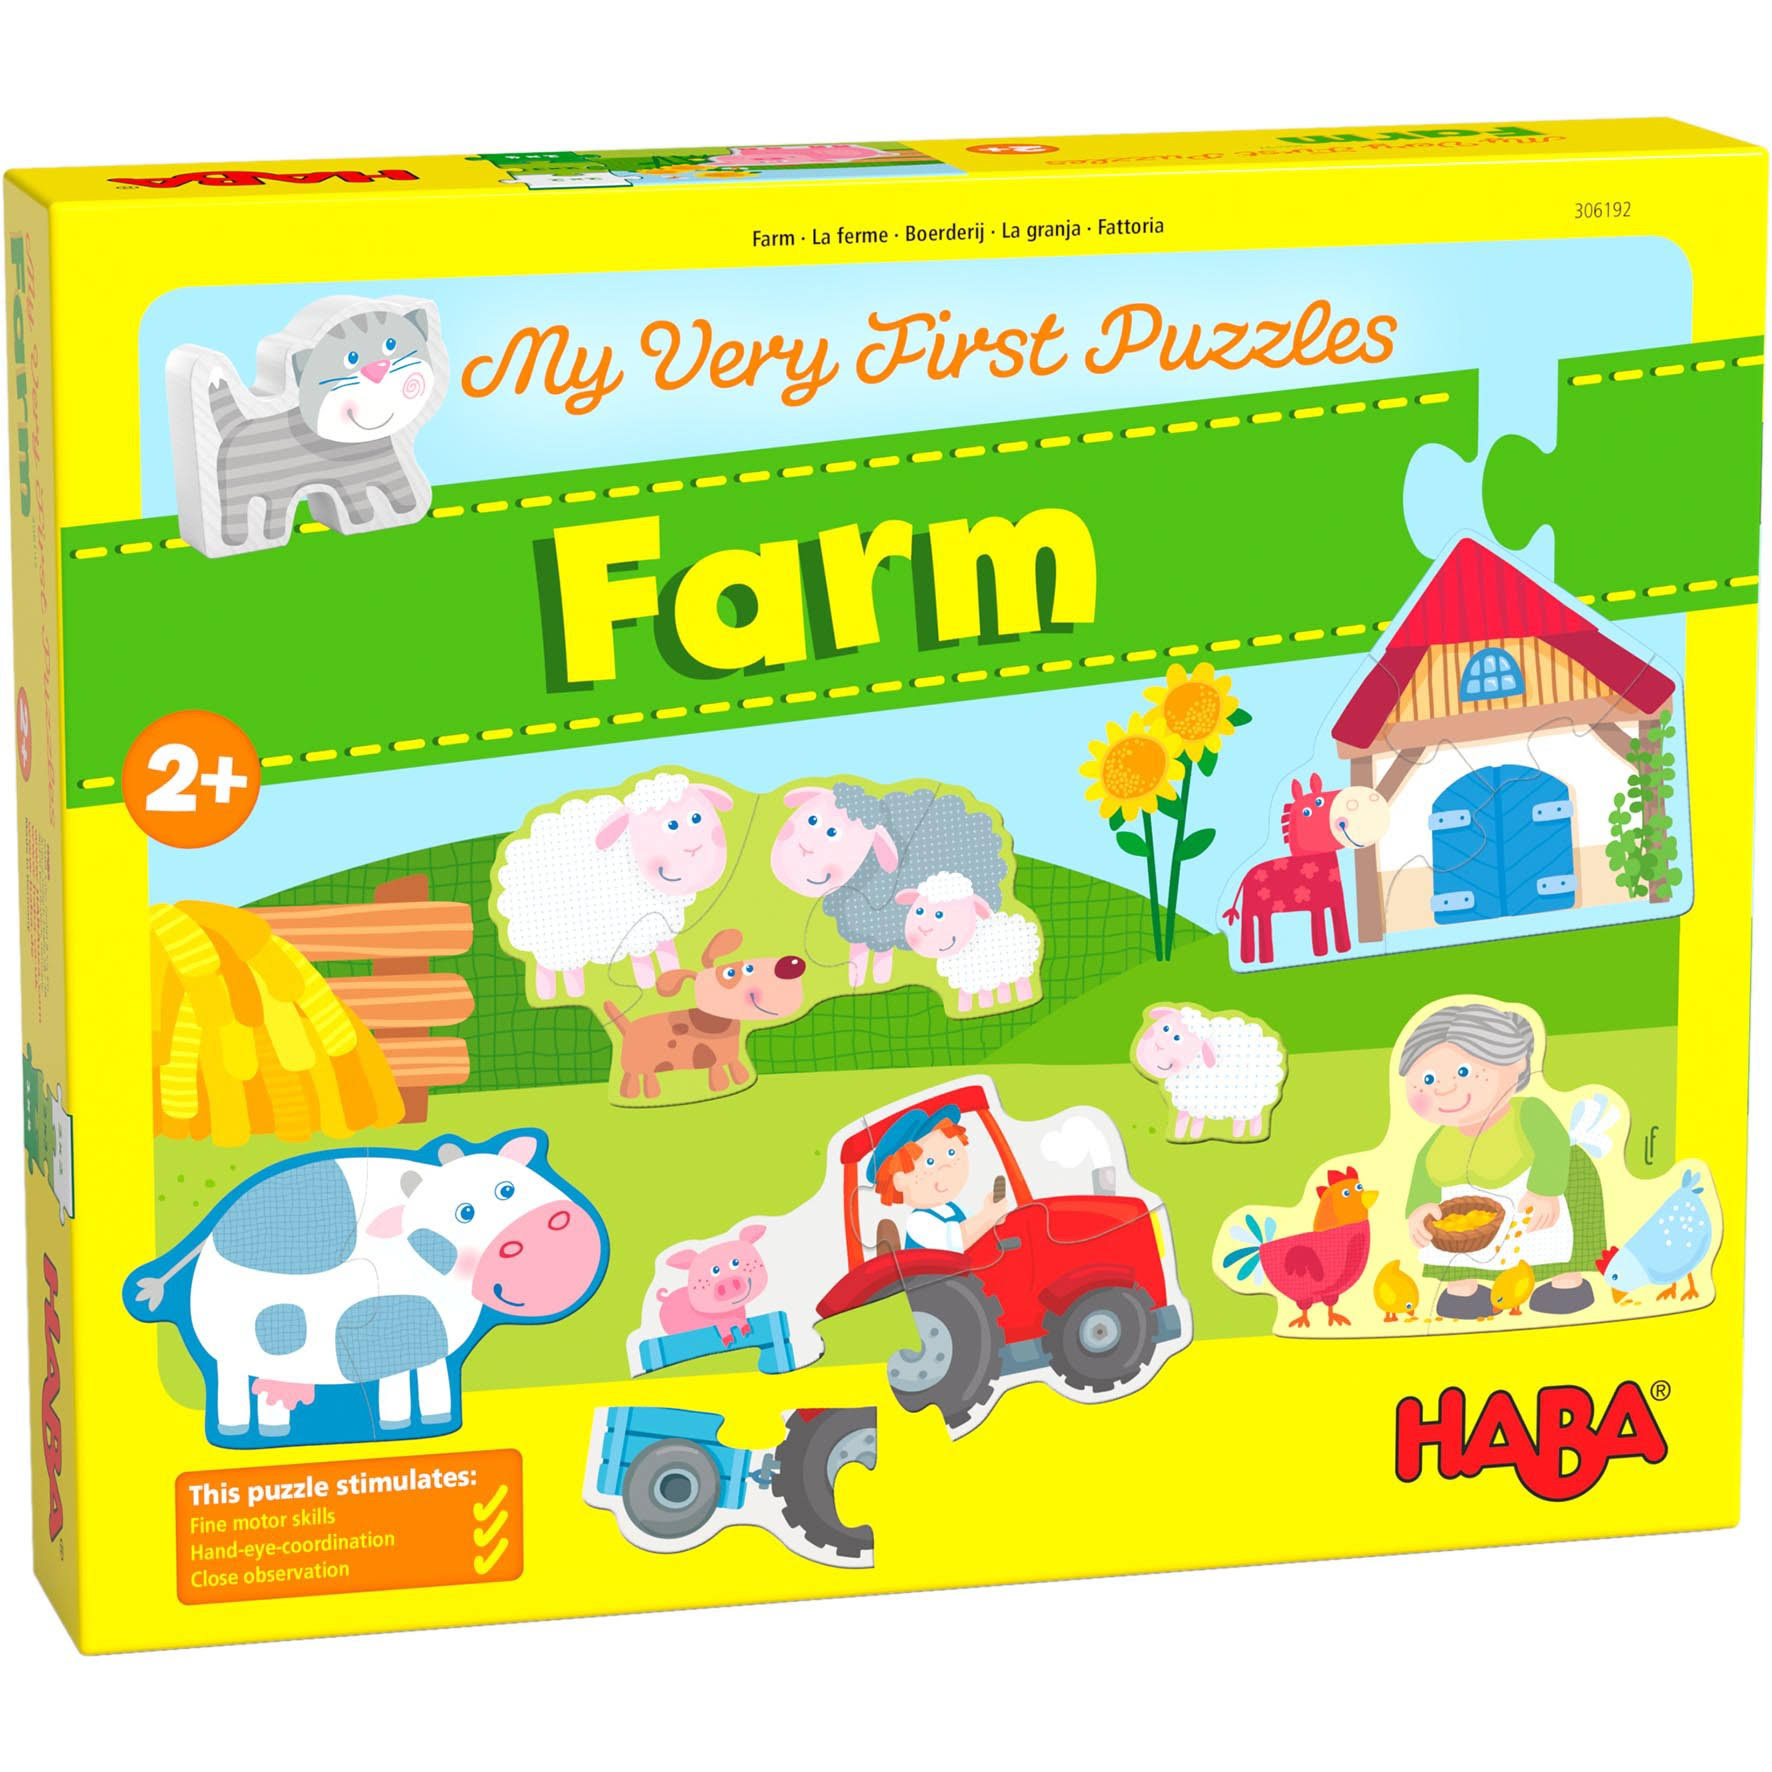 Haba My Very First Puzzles - Farm - Size Small